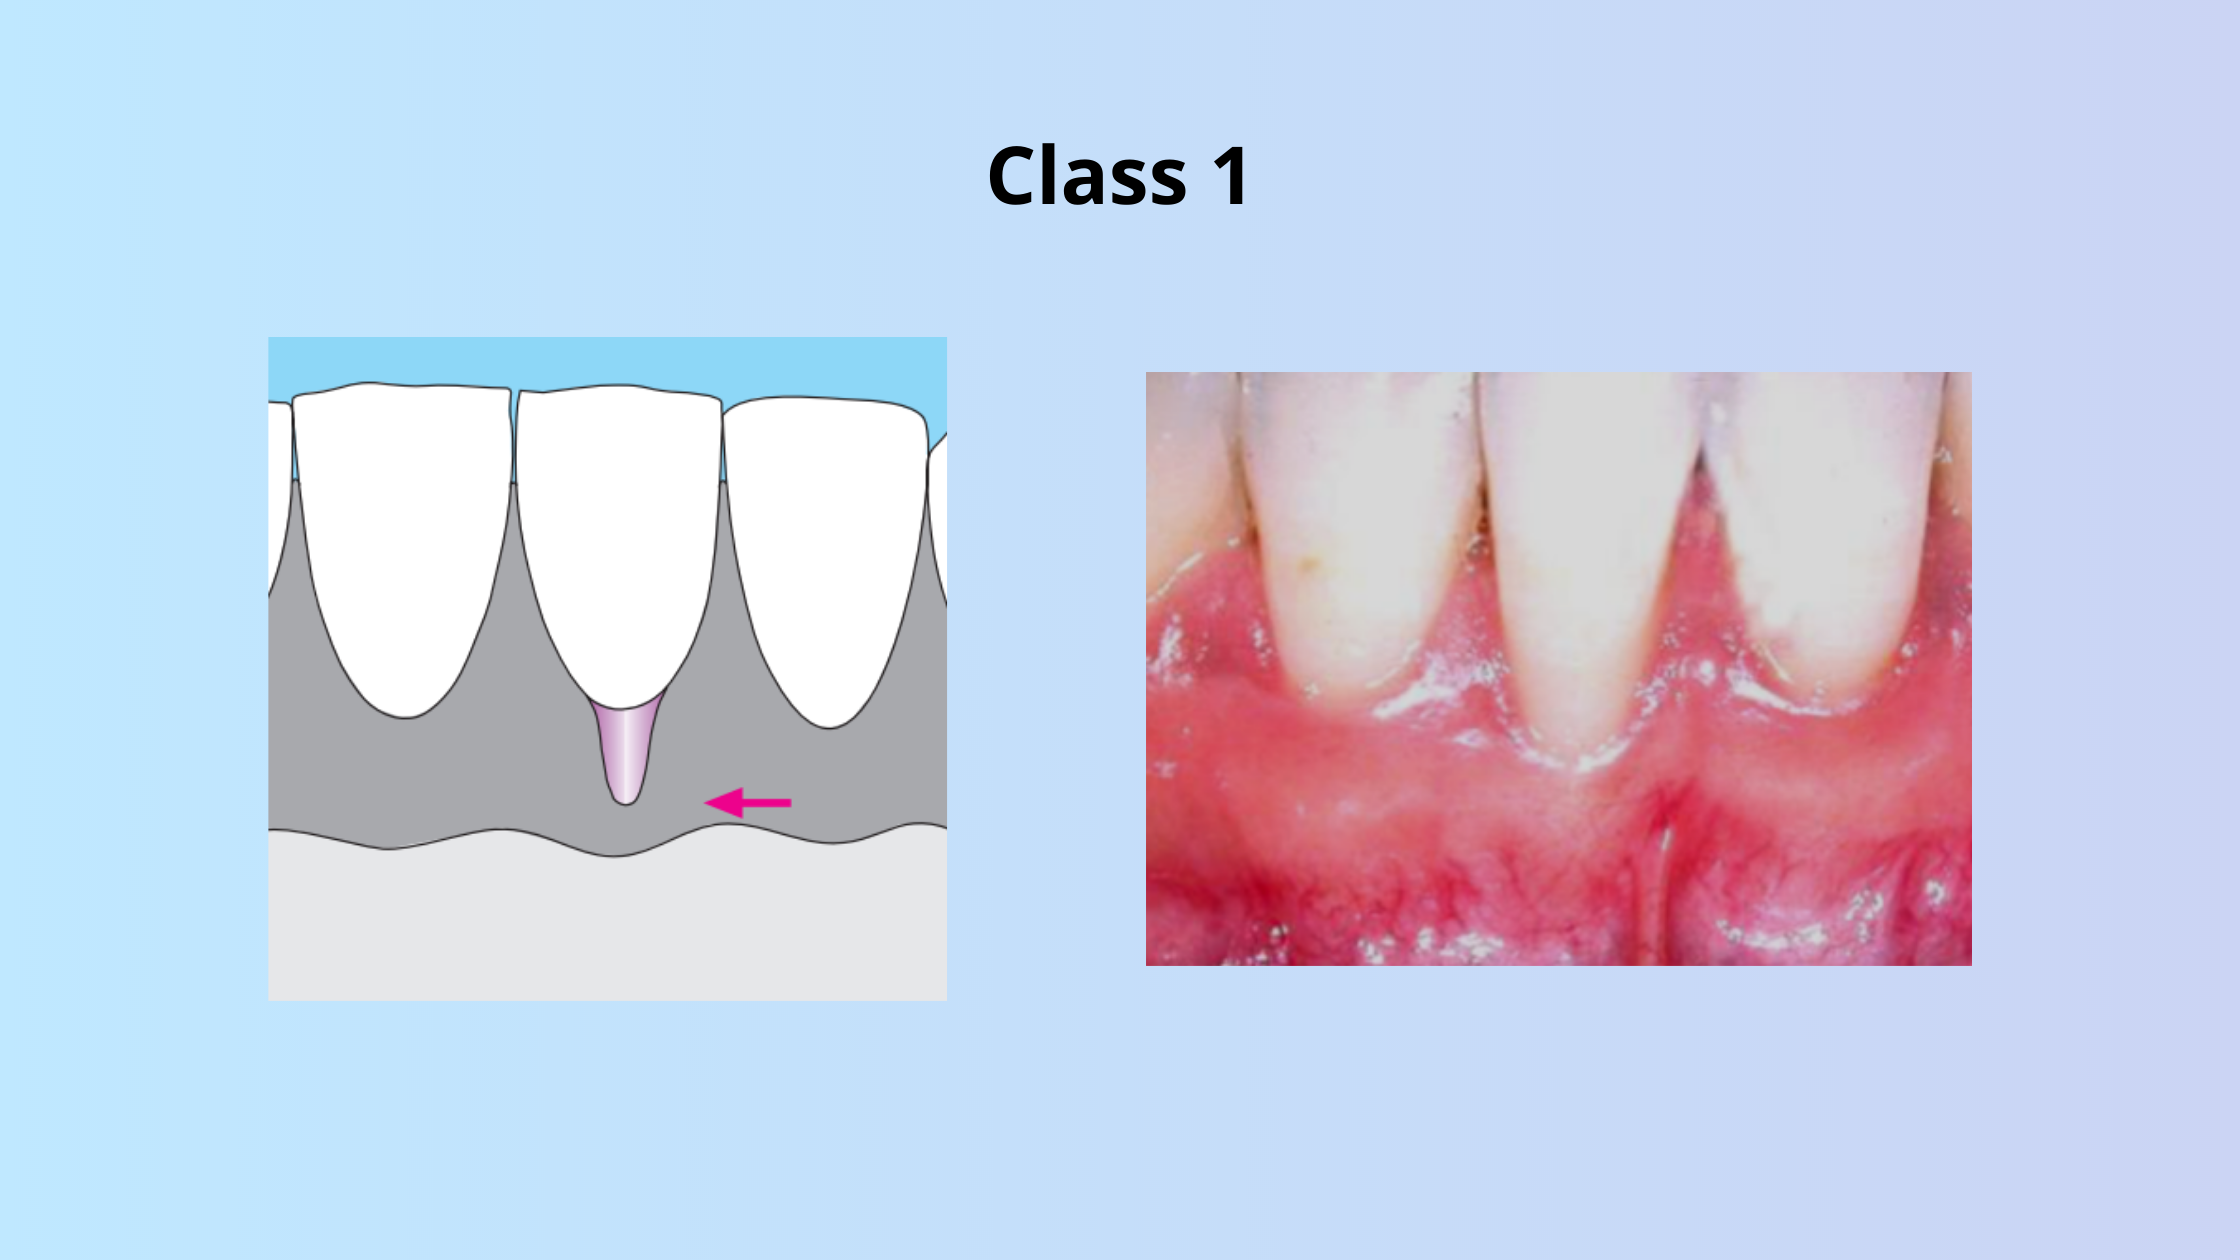 Class 1 of gingival recession according to Miller